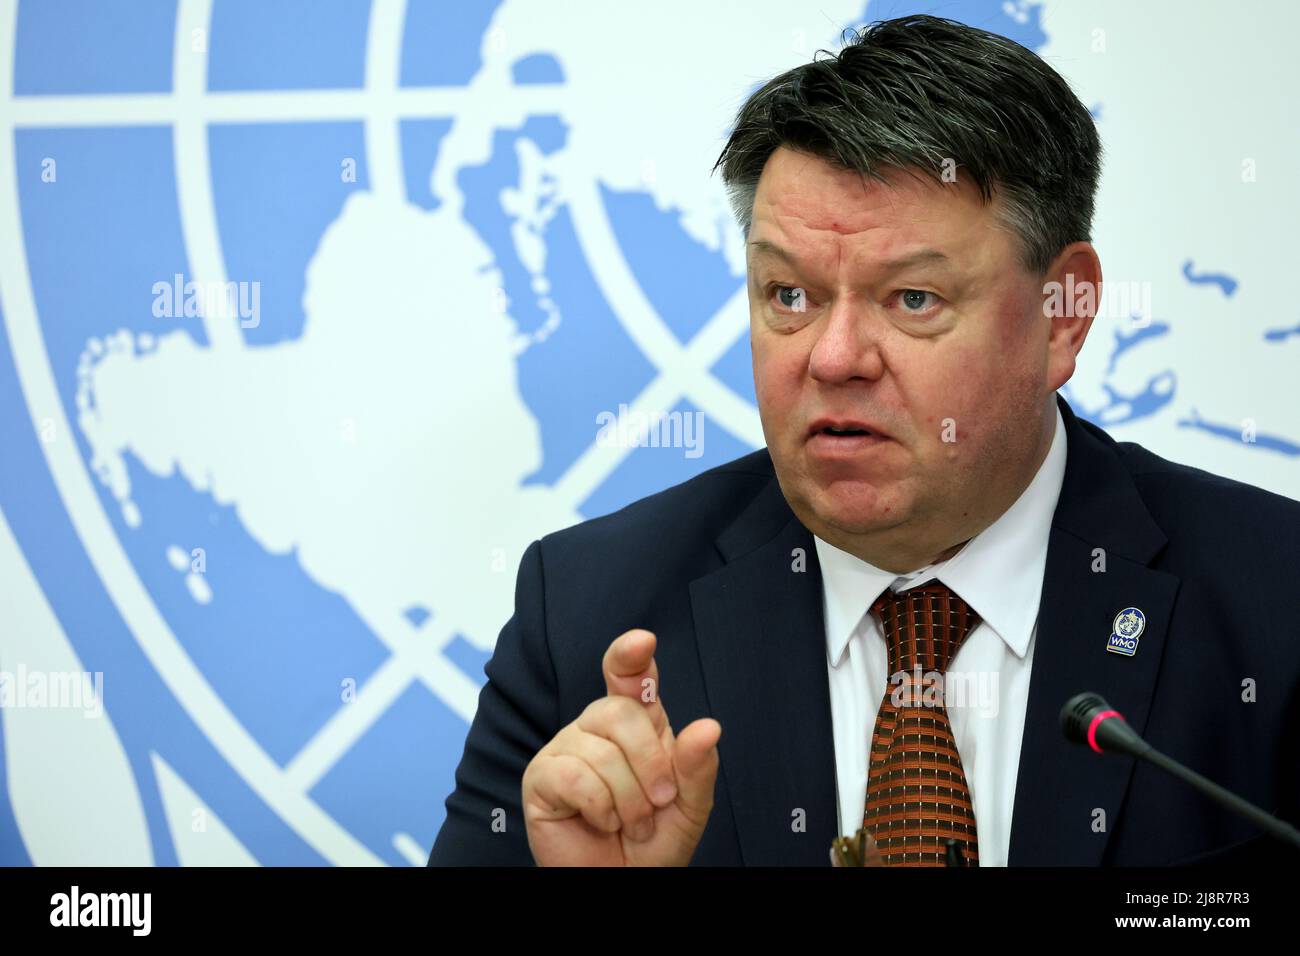 World Meteorological Organization (WMO) Secretary-General Petteri Taalas attends a news conference to launch a state of global climate report at the United Nations in Geneva, Switzerland, May 18, 2022. REUTERS/Denis Balibouse Stock Photo